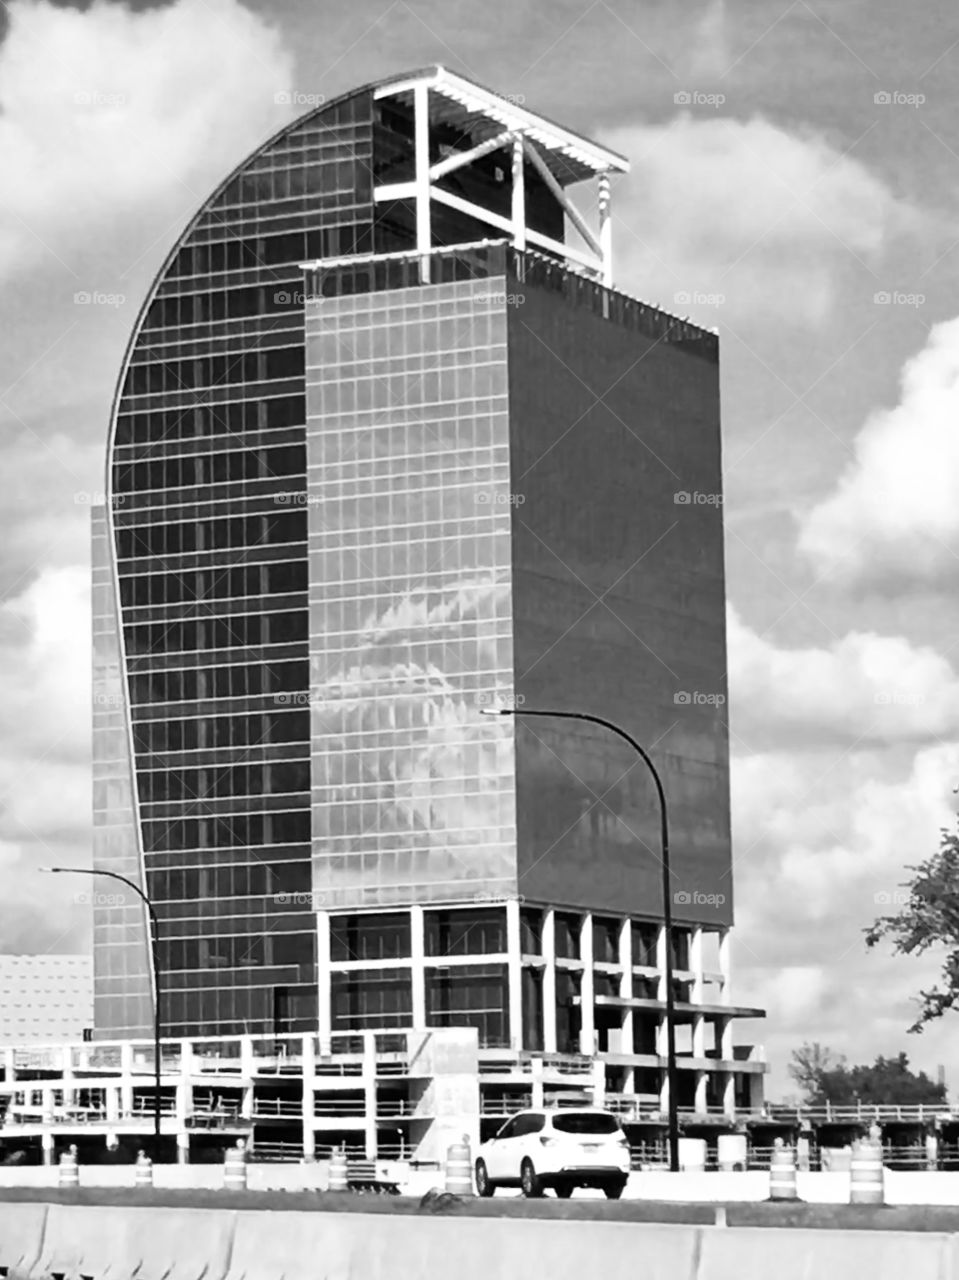 Eyesore of I4 aka The Majesty building. I call it The Sailboat building. 